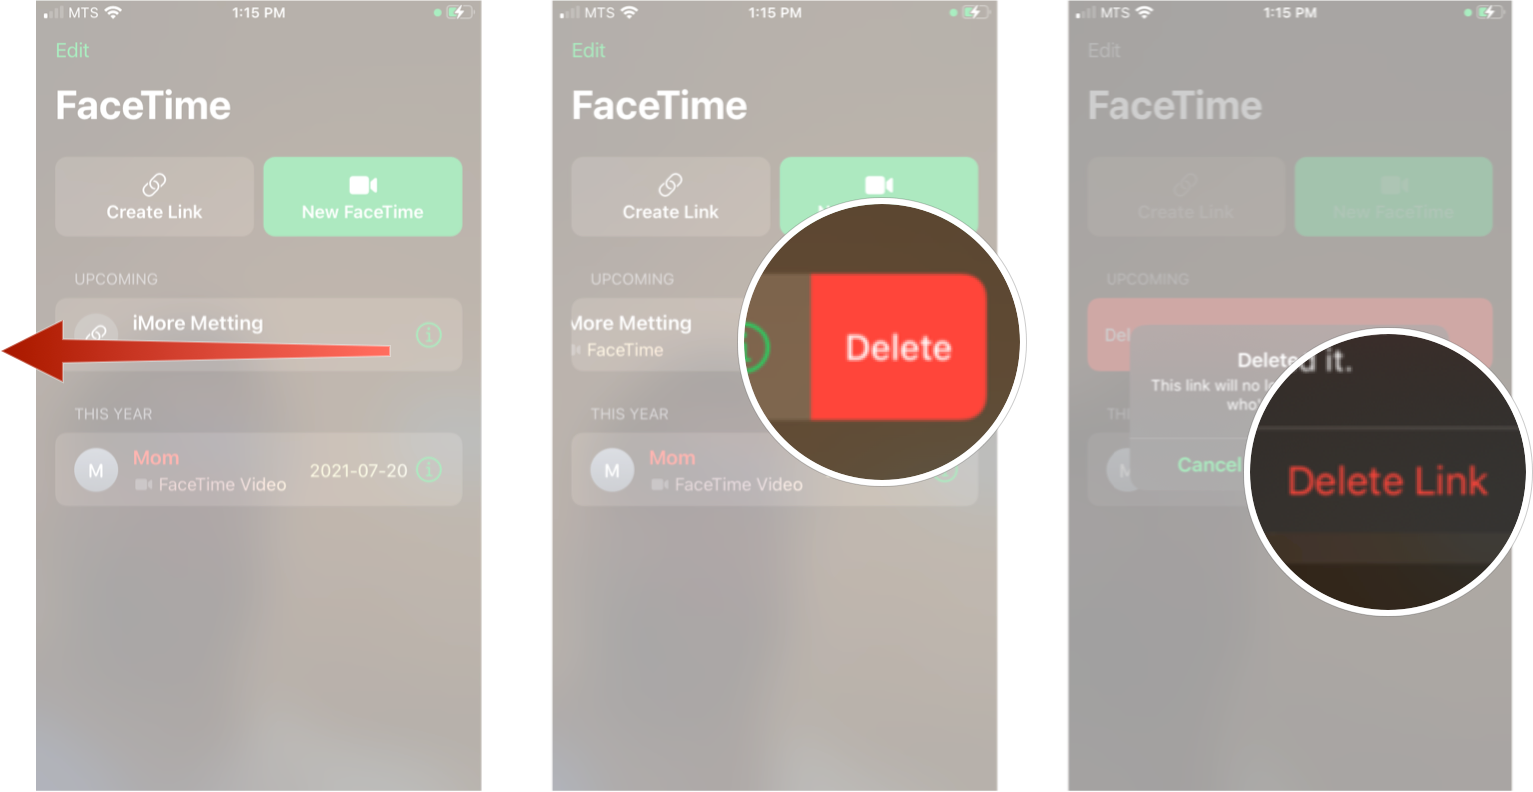 Deleting Facetime Link in iOS 15: Launch FaceTime, swipe left on the link you want to delete, tap delete, and then tap delete link.